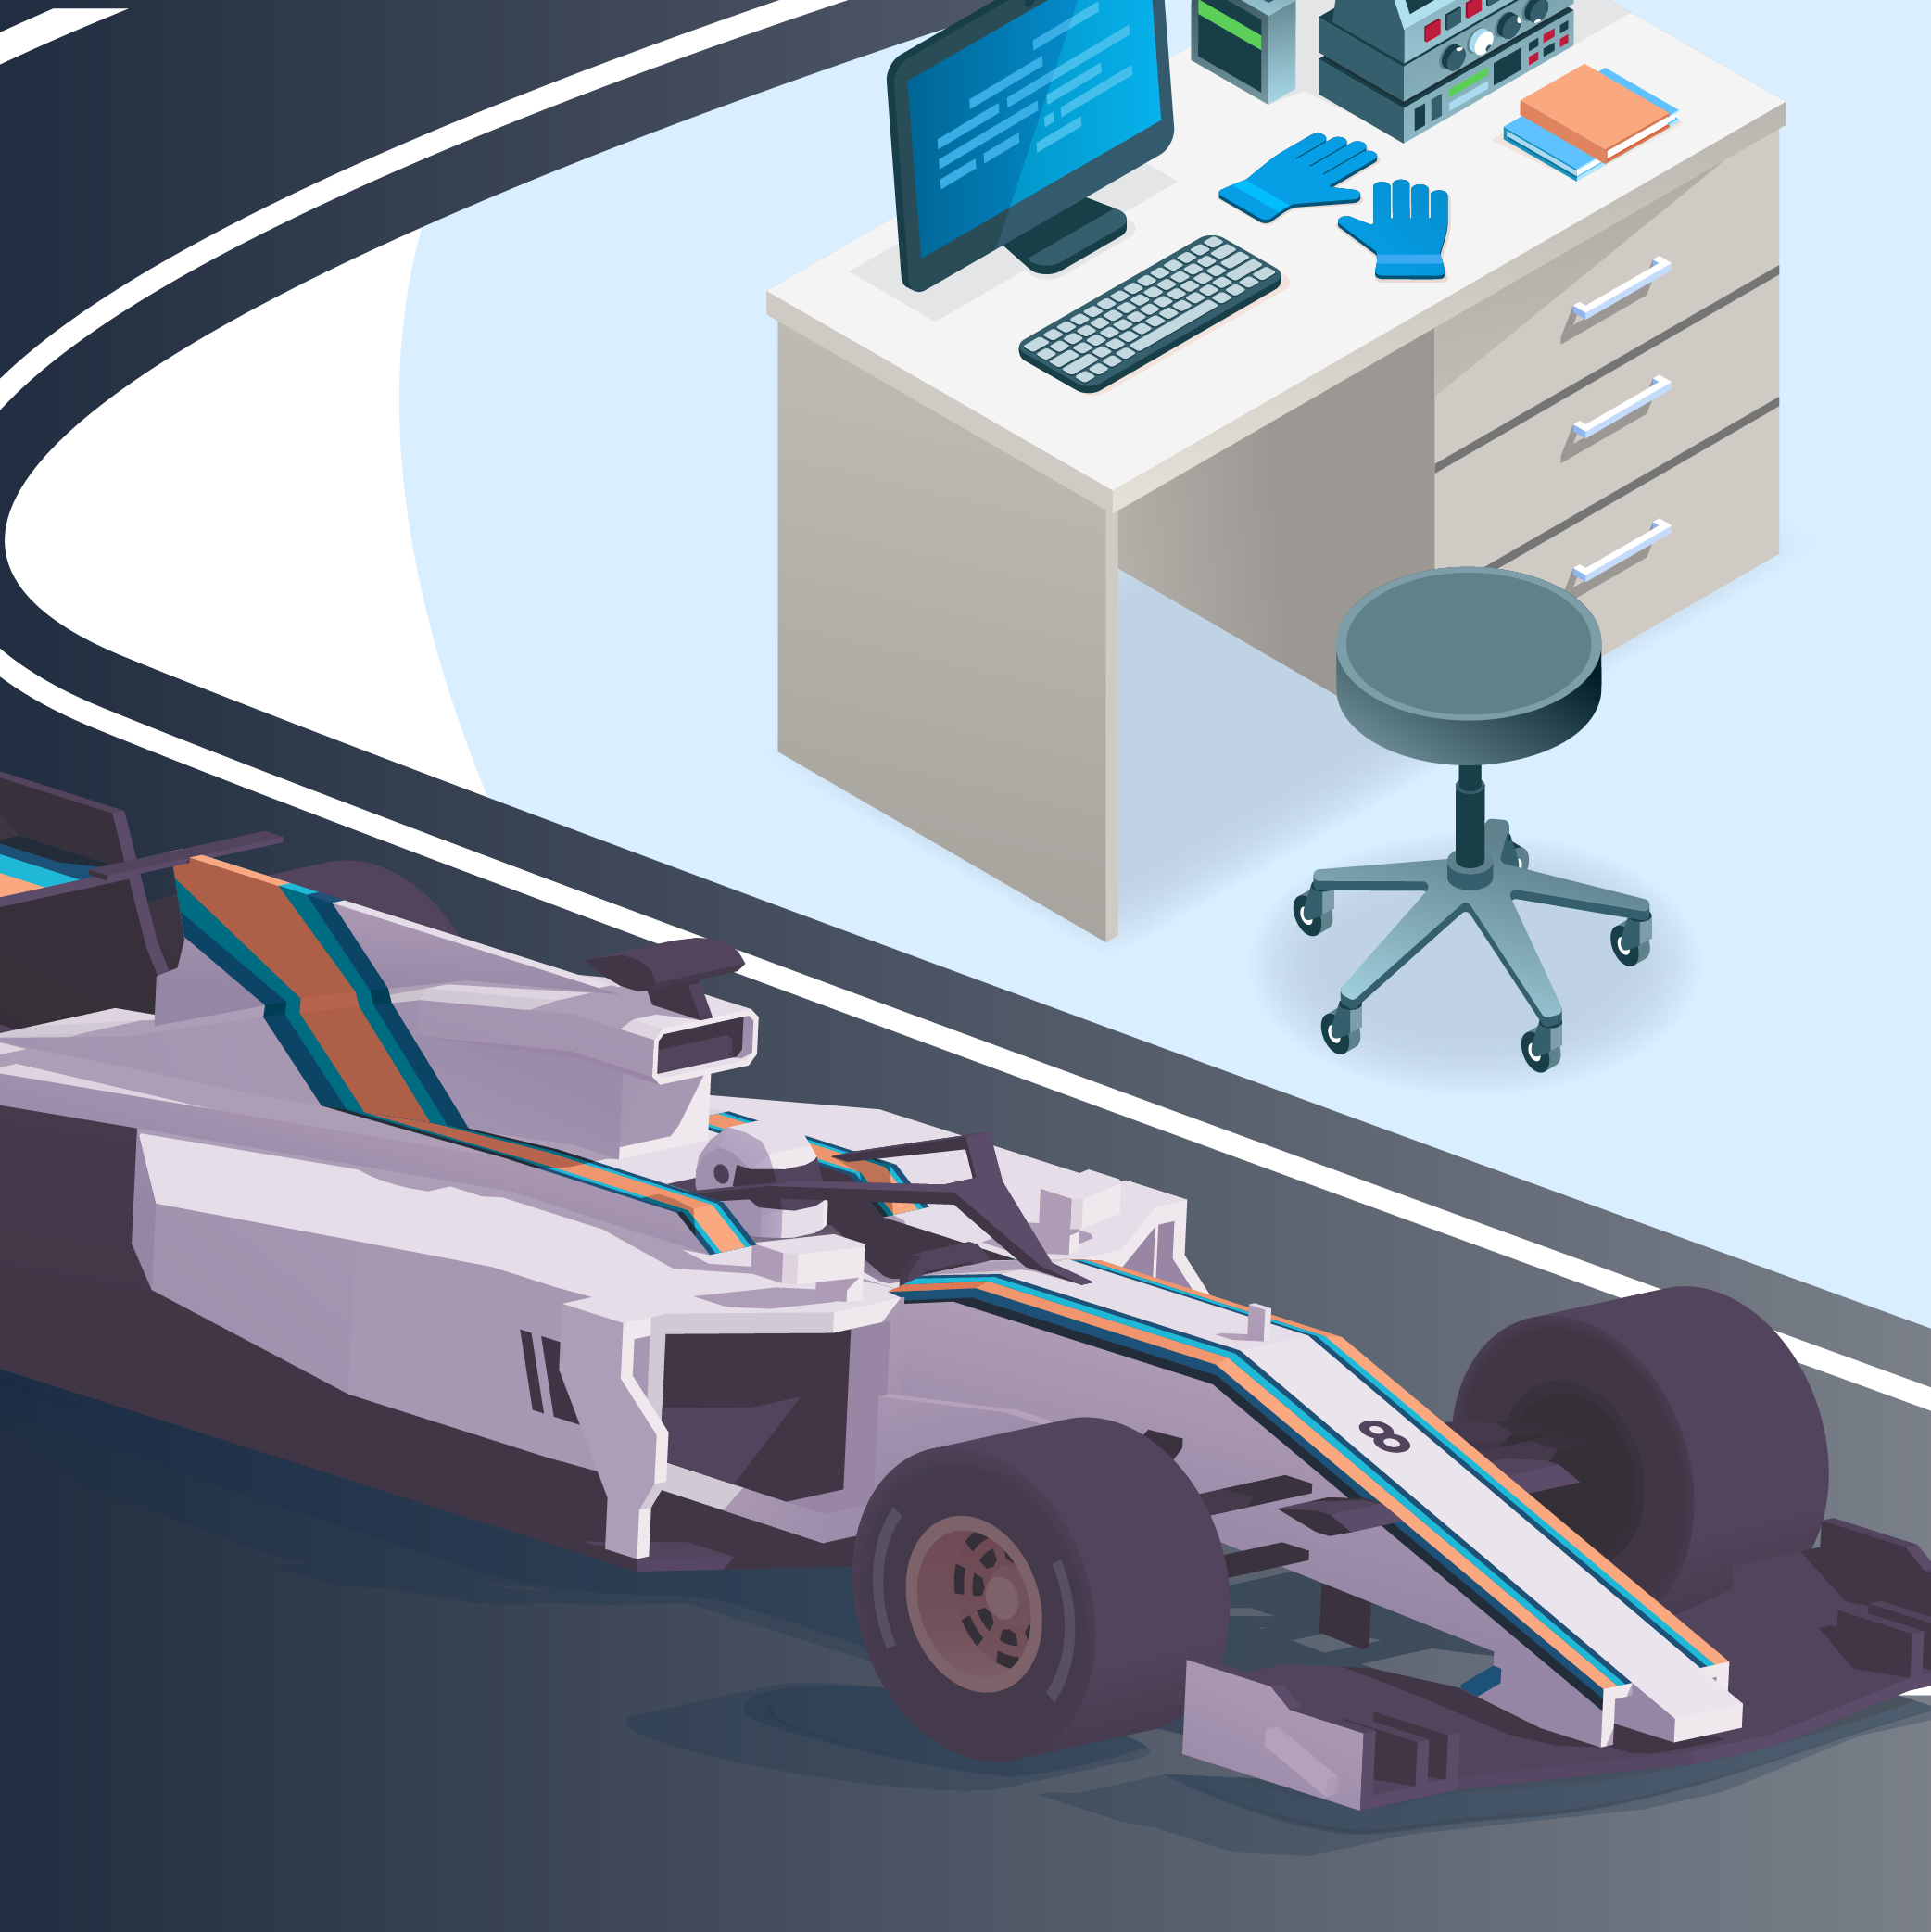 A Formula 1 car on a track and desk with a computer